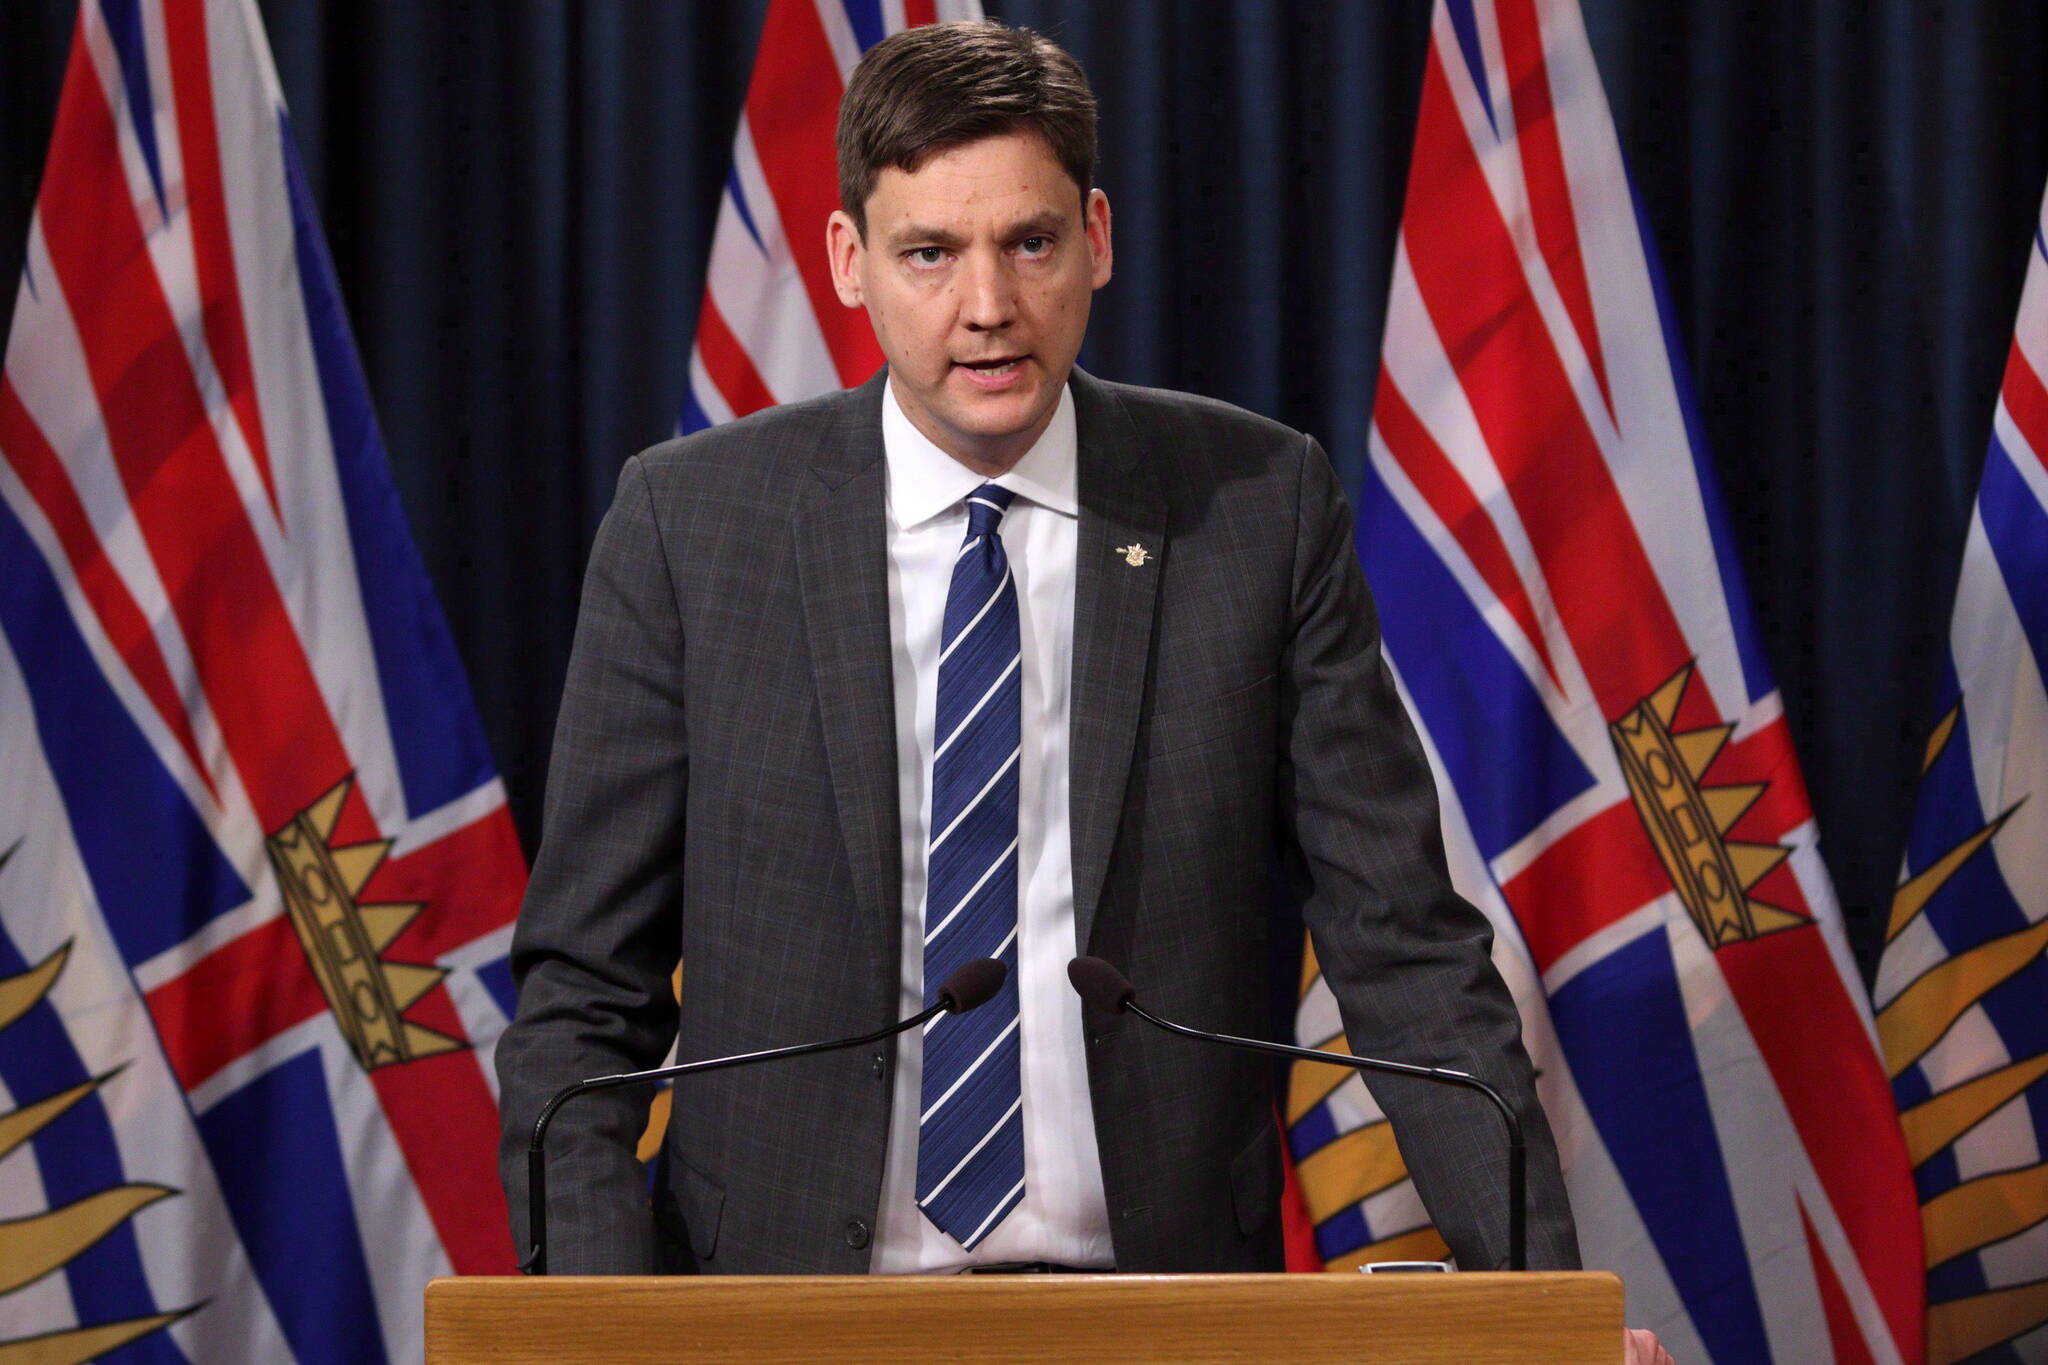 Premier David Eby confirmed that the province is working on province-wide legislation that would support municipalities looking into banning drug use in public parks. (Photo: THE CANADIAN PRESS/Chad Hipolito)